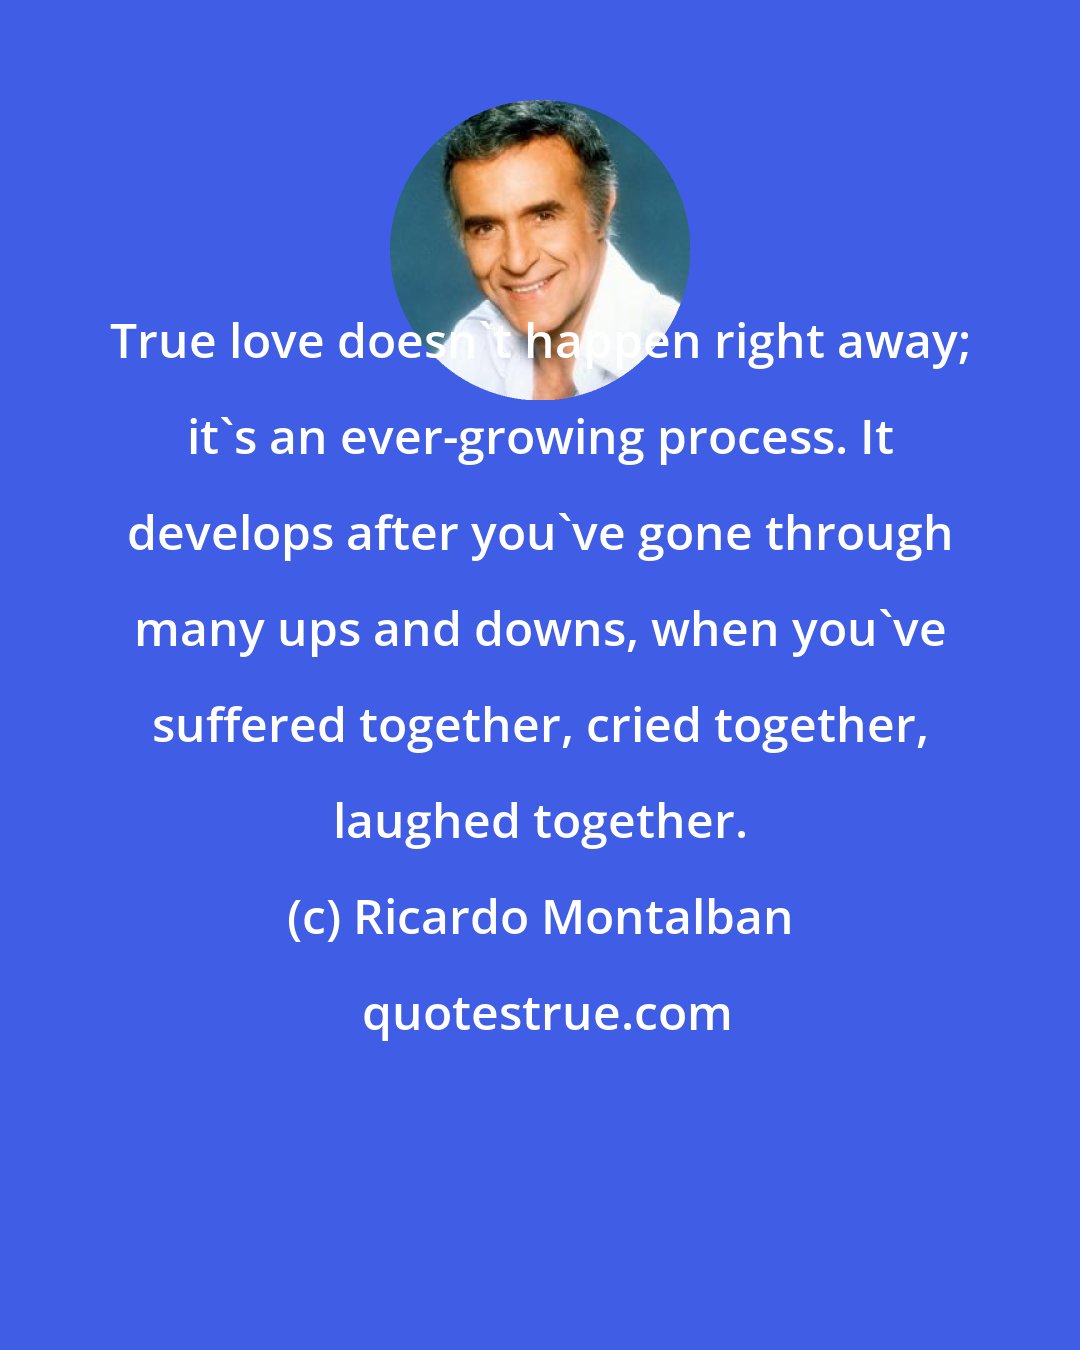 Ricardo Montalban: True love doesn't happen right away; it's an ever-growing process. It develops after you've gone through many ups and downs, when you've suffered together, cried together, laughed together.